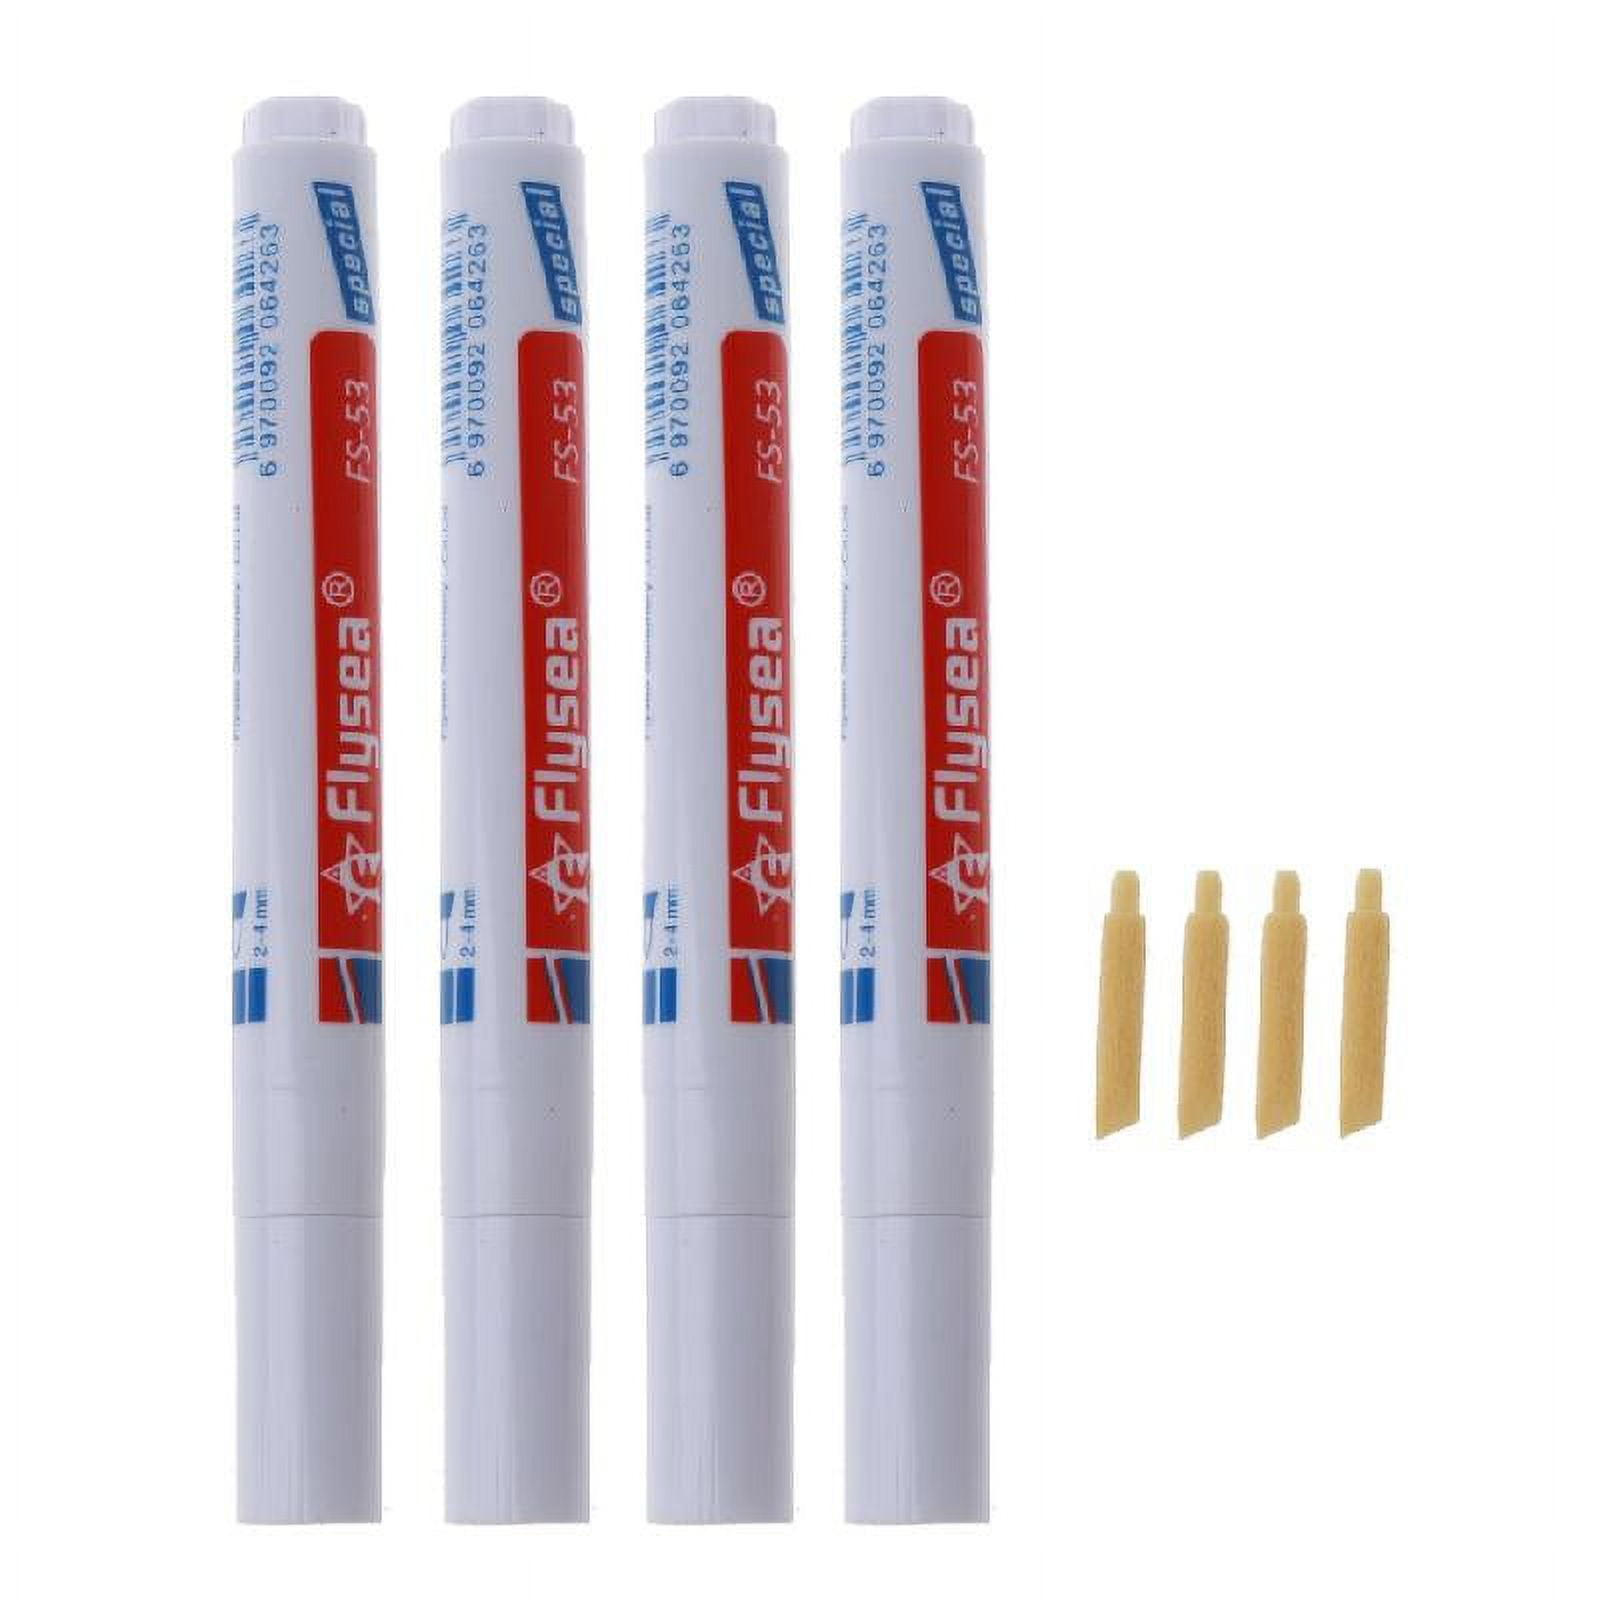 Autmor Grout Pen White Grout Repair Marker with Replacement Nib Tip to Restore The Look of Tile Grout Lines (1pcs), 1 Pcs